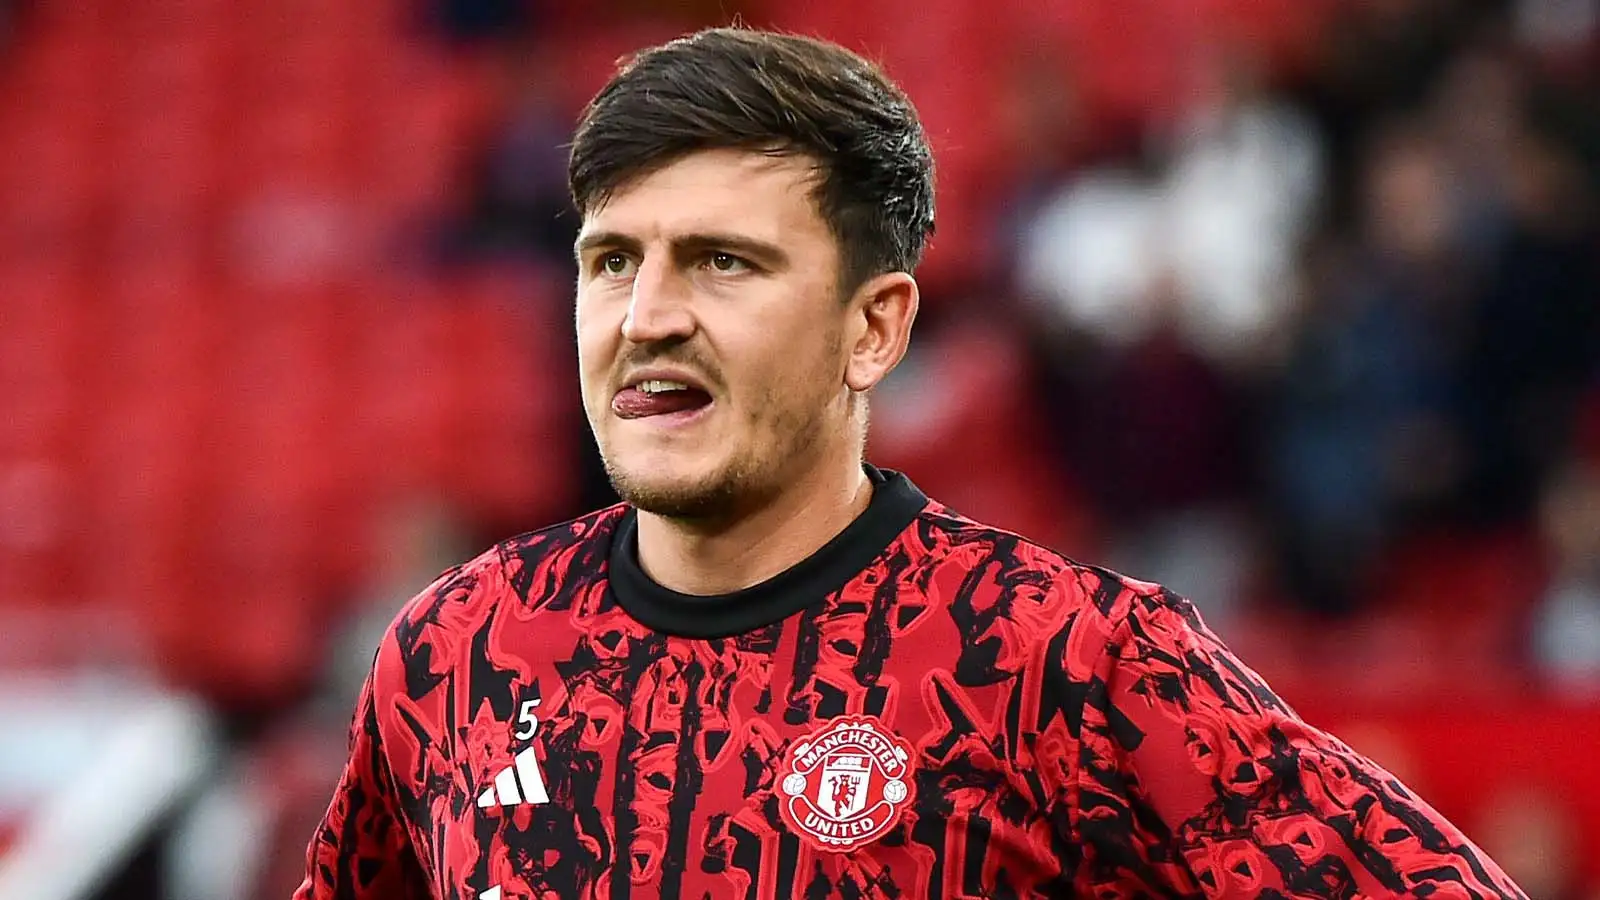 Manchester United's Harry Maguire looks on